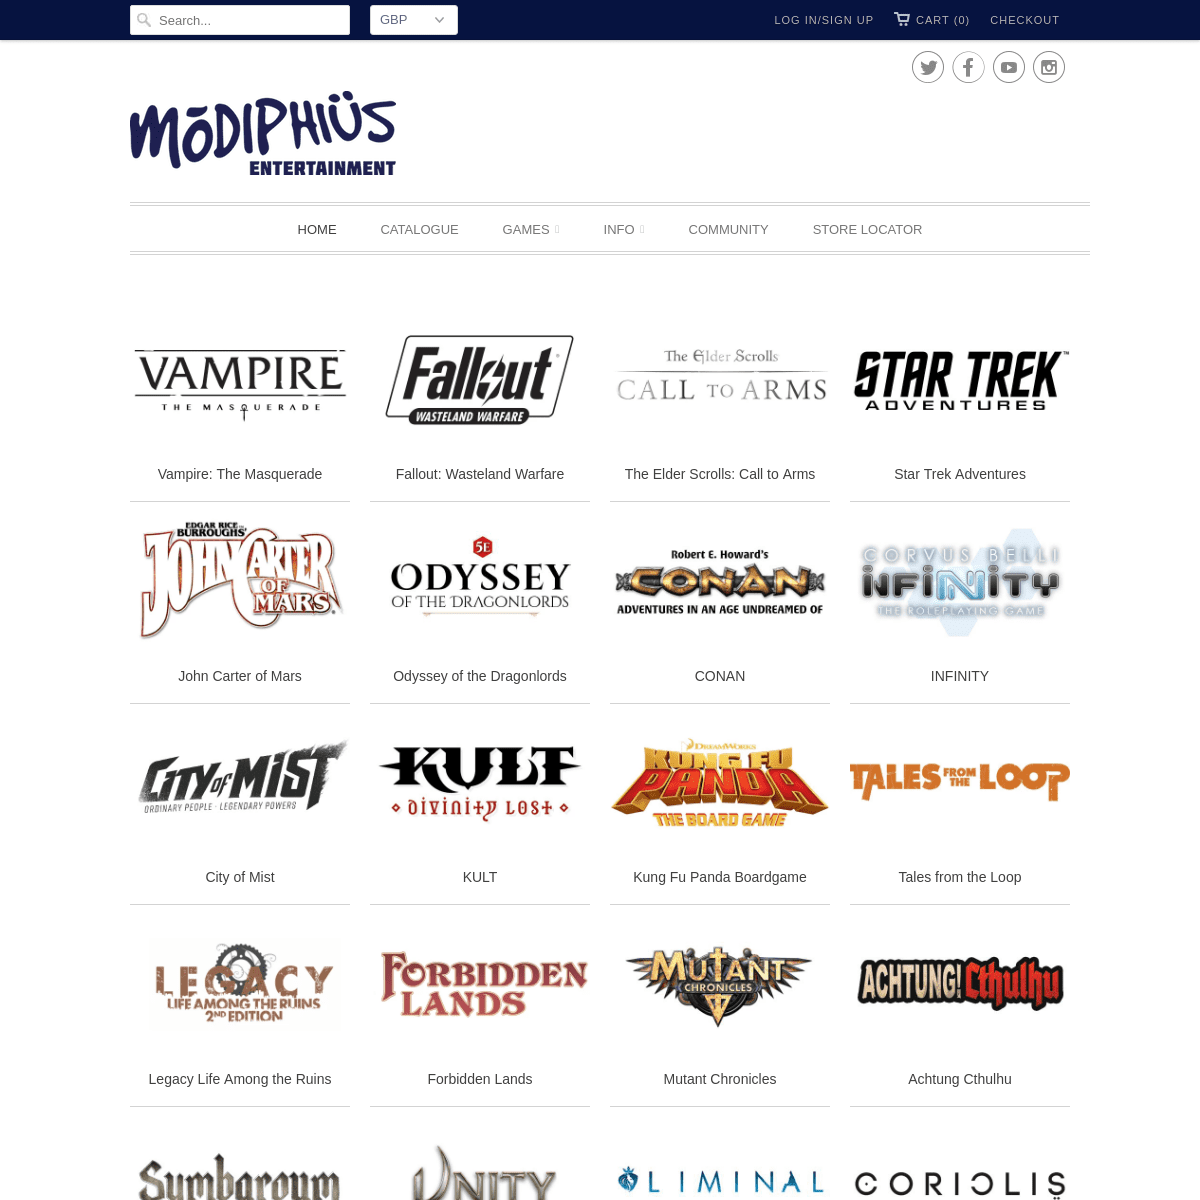 Welcome to the Modiphius online store.